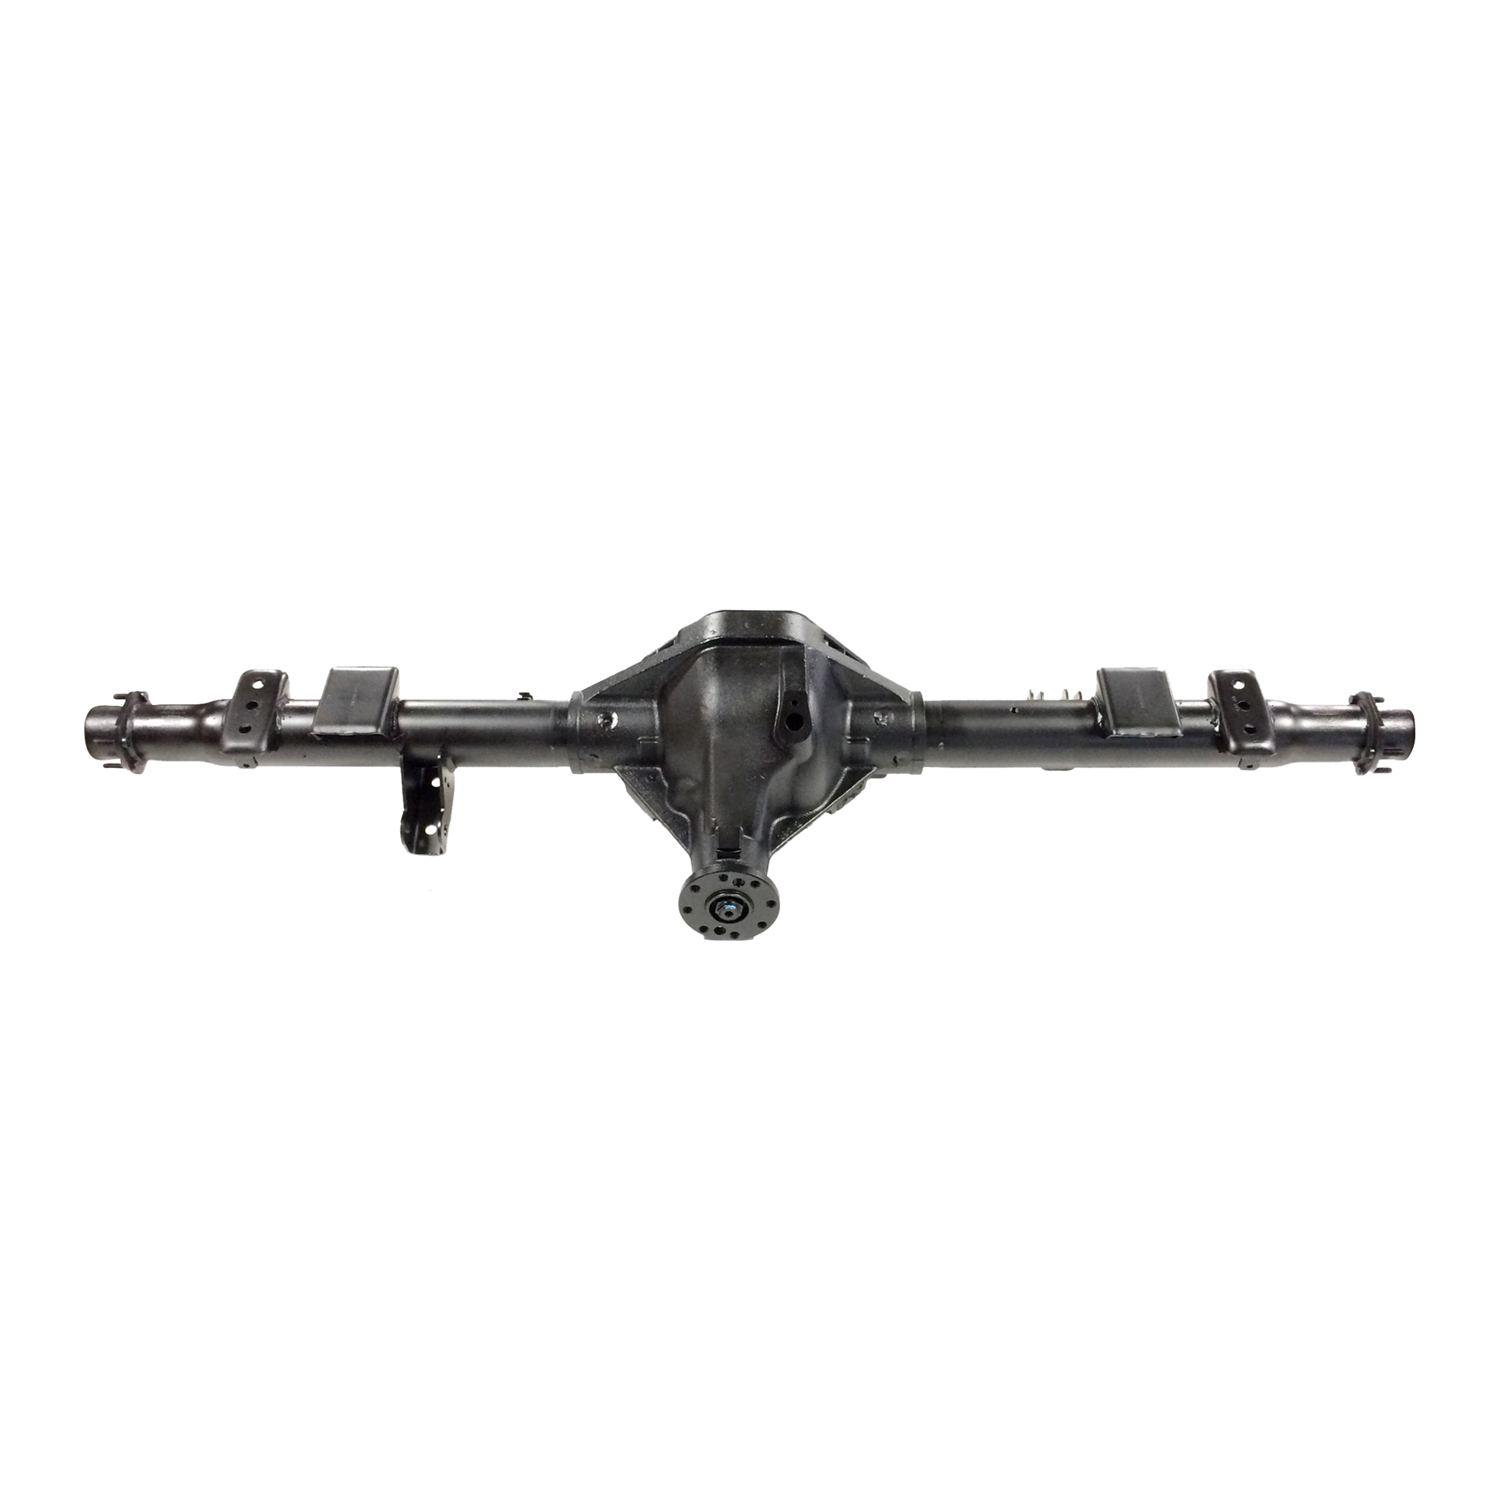 Remanufactured Complete Axle Assembly for Chy 9.25" 02-05 D1500 3.90 , 4x4, Posi LSD